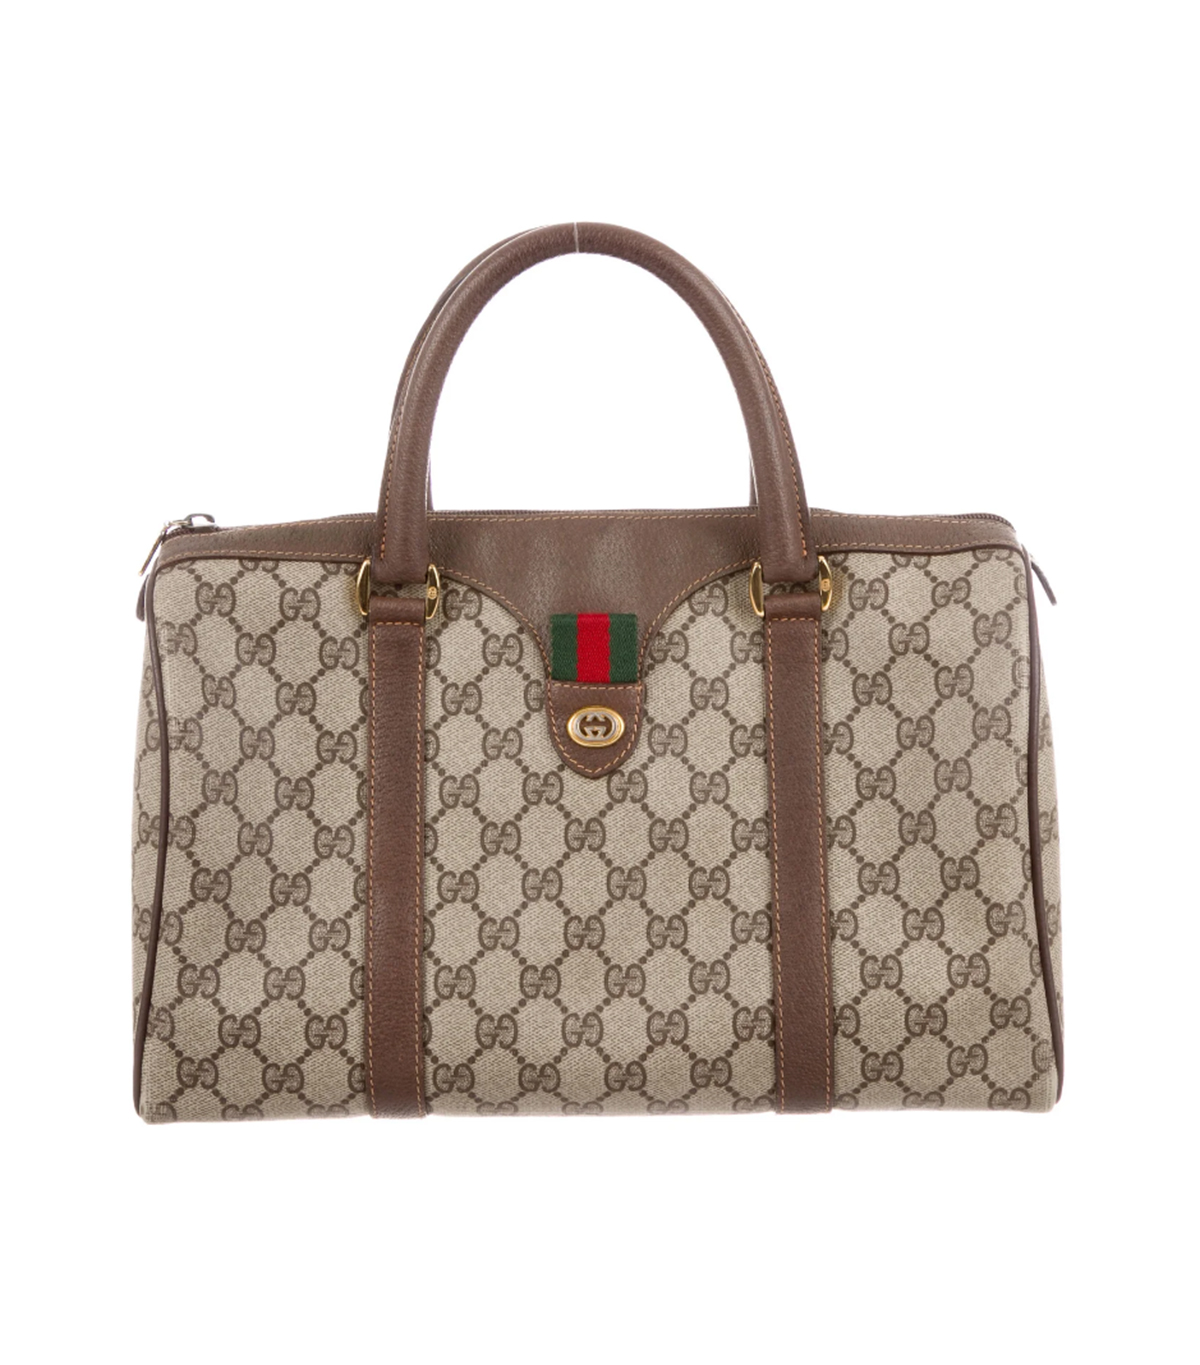 cheapest gucci bag in the world